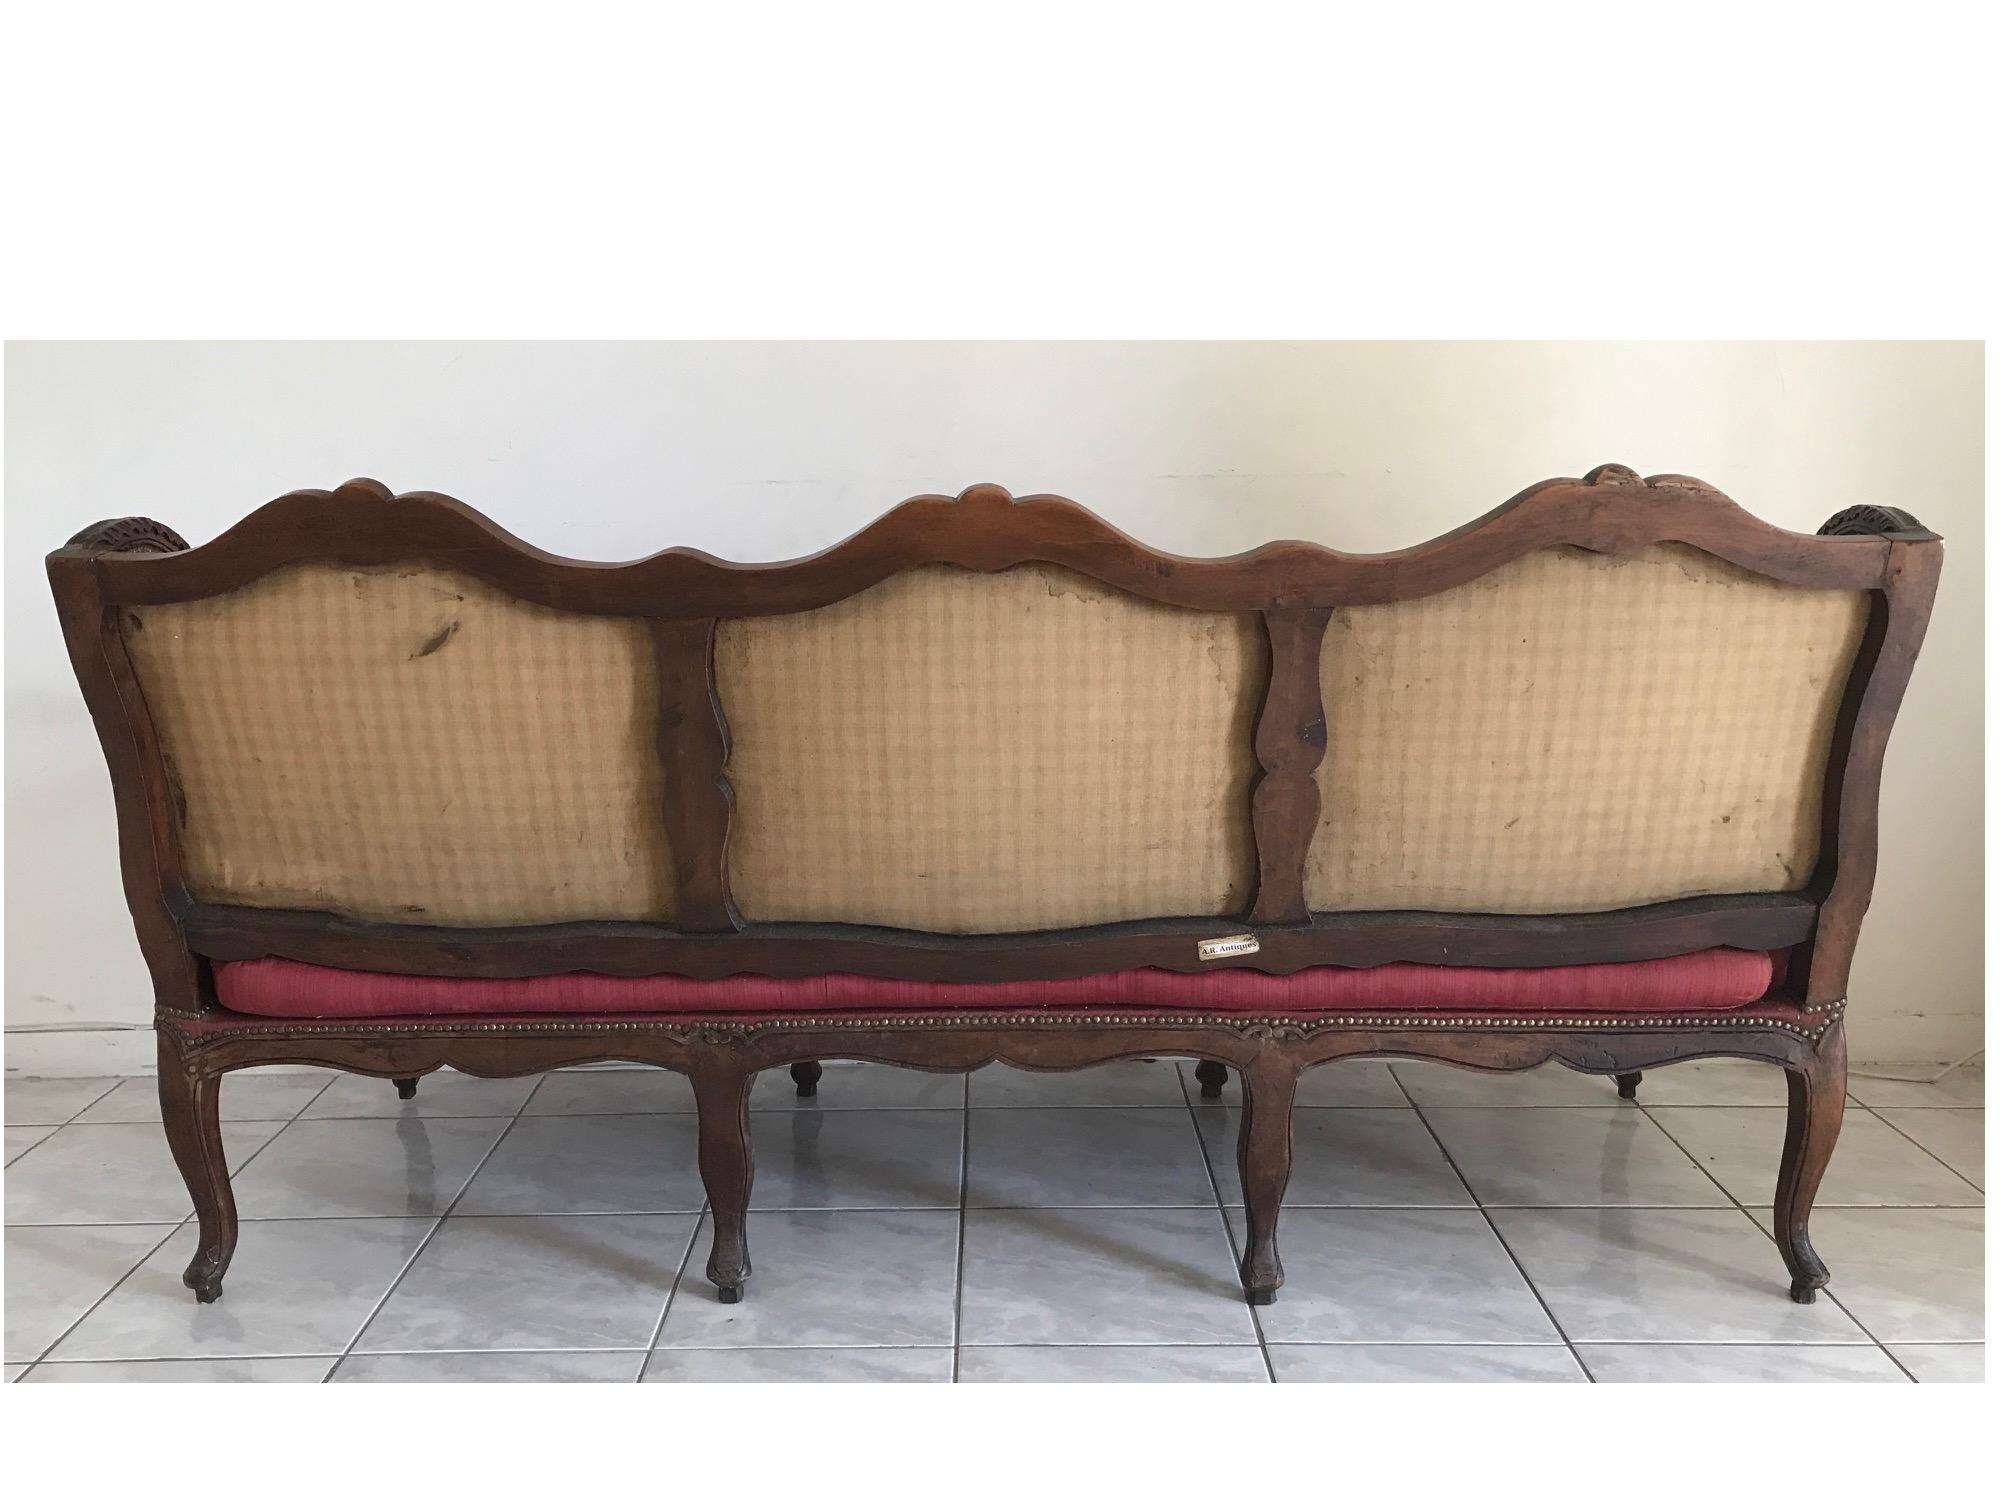 Regency French Early 18th Century Sofa For Sale